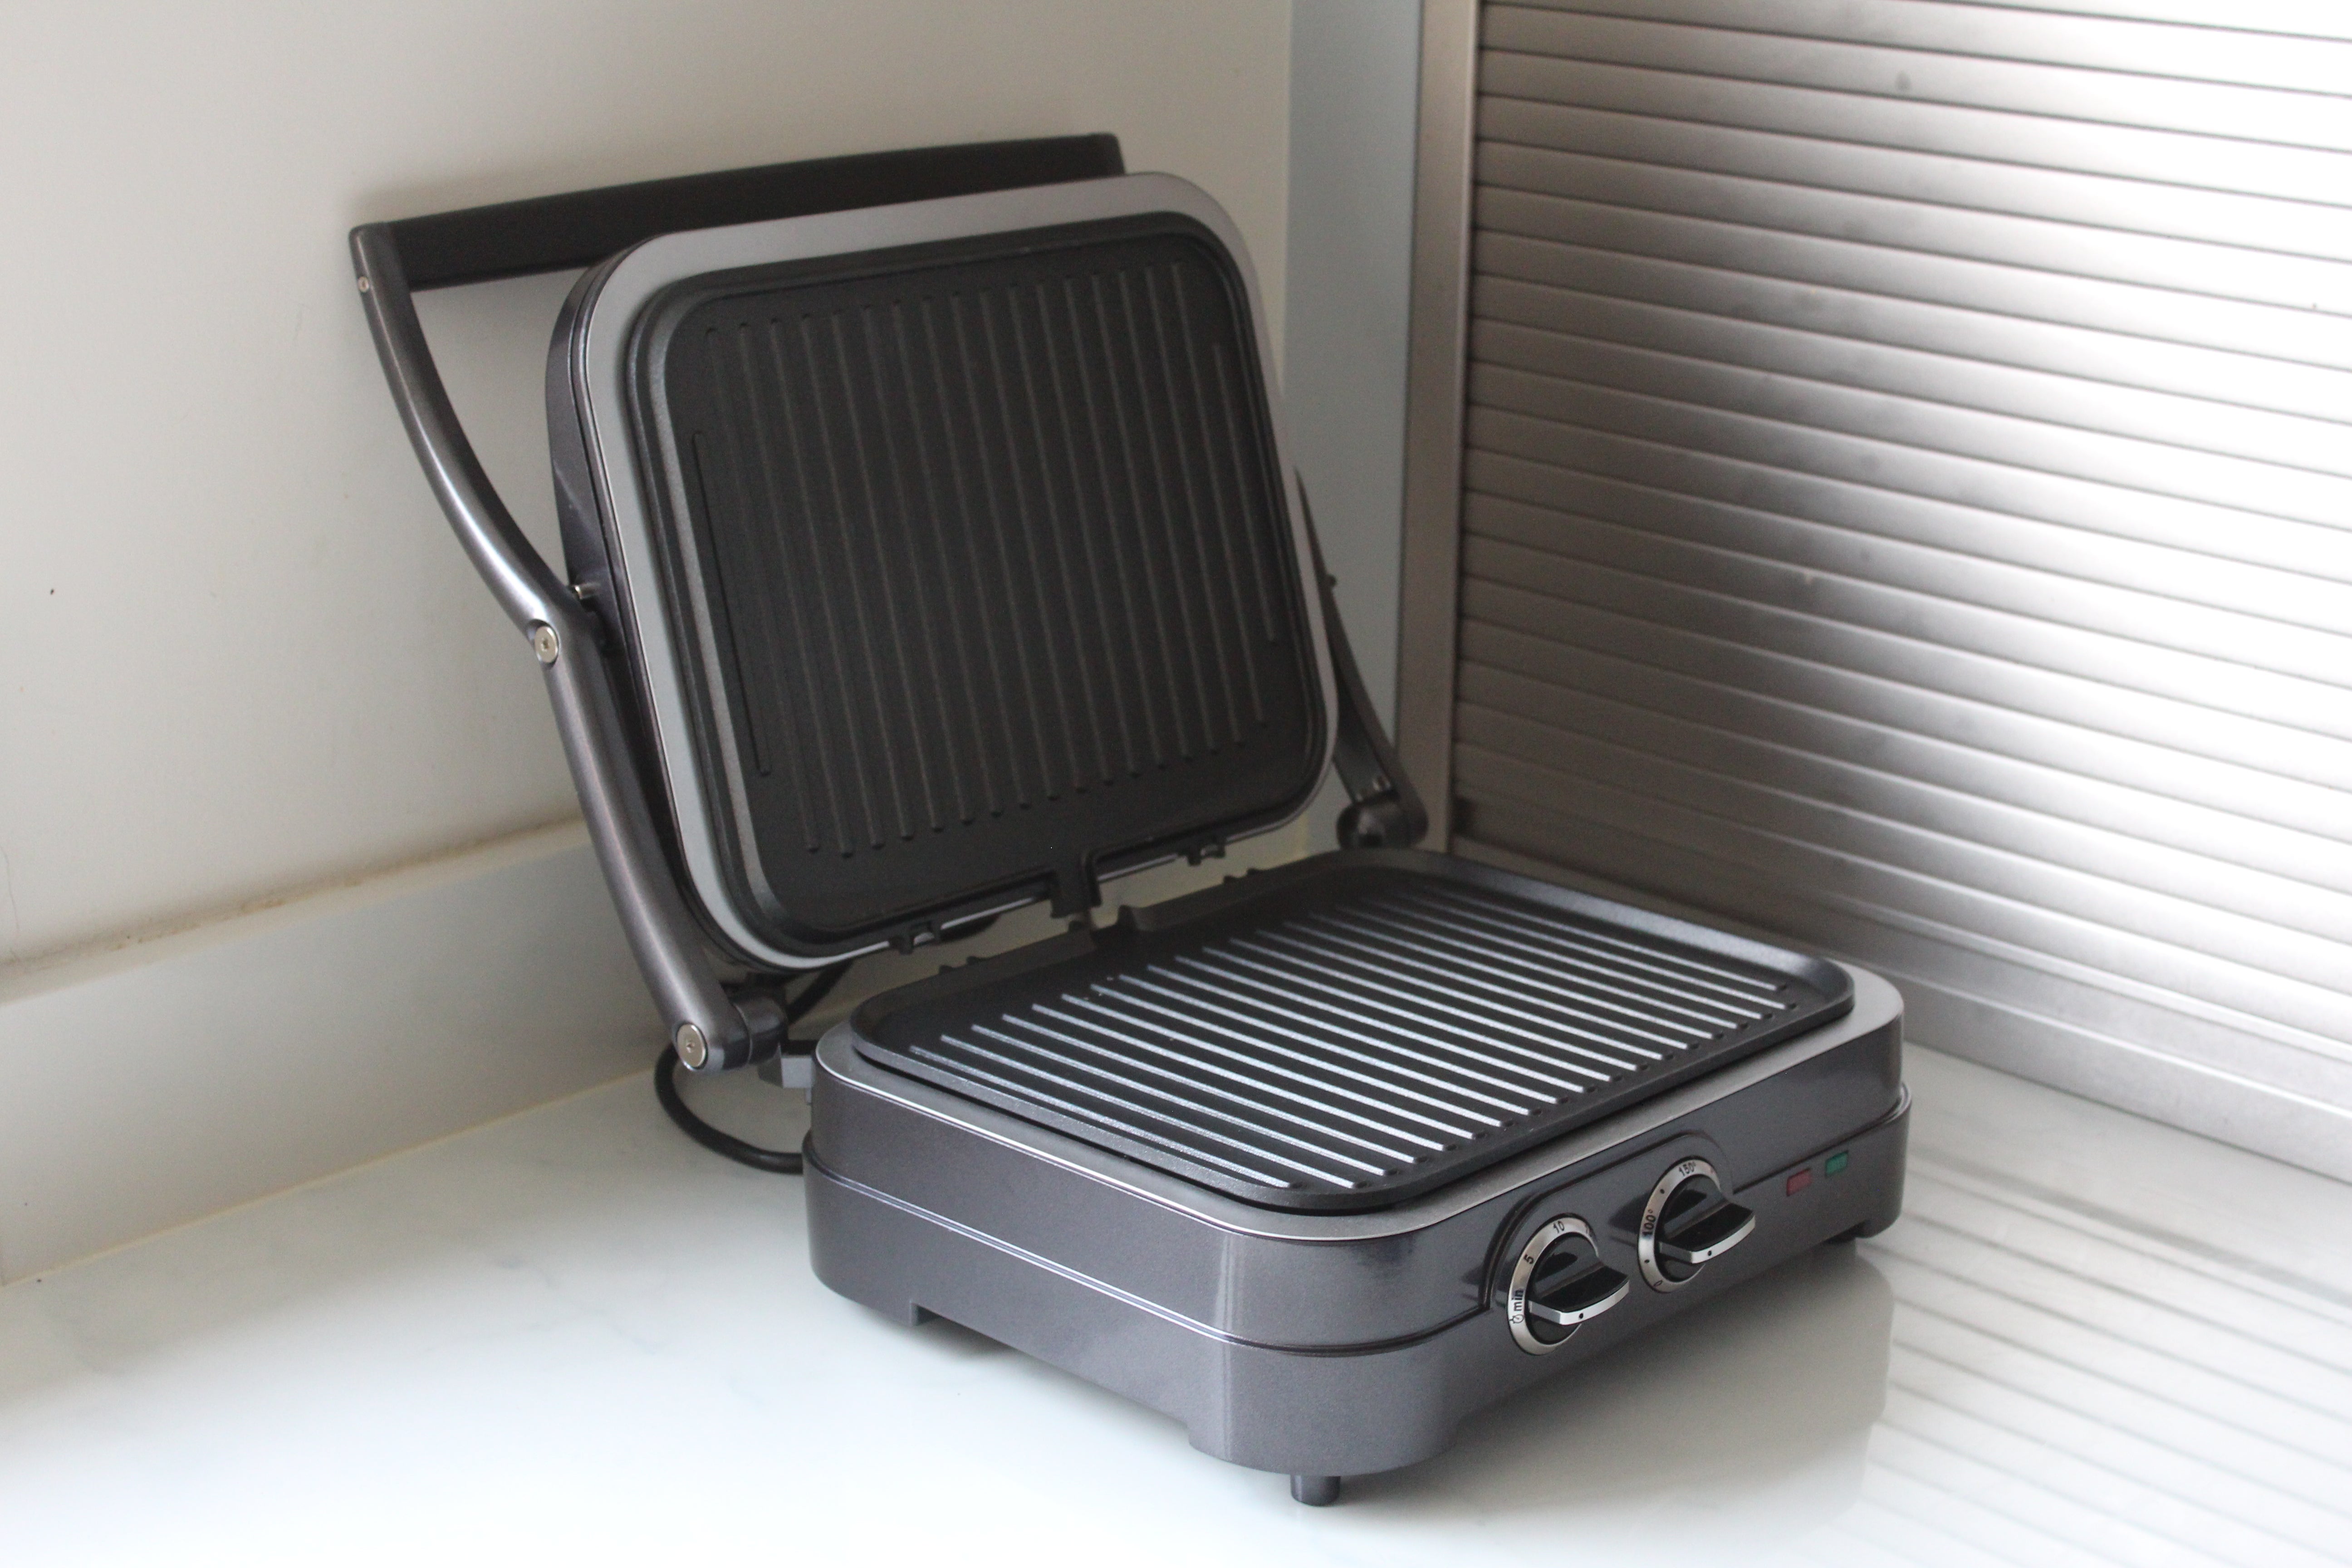 Aja toewijding Raap bladeren op Cuisinart Griddle & Grill Review | Trusted Reviews